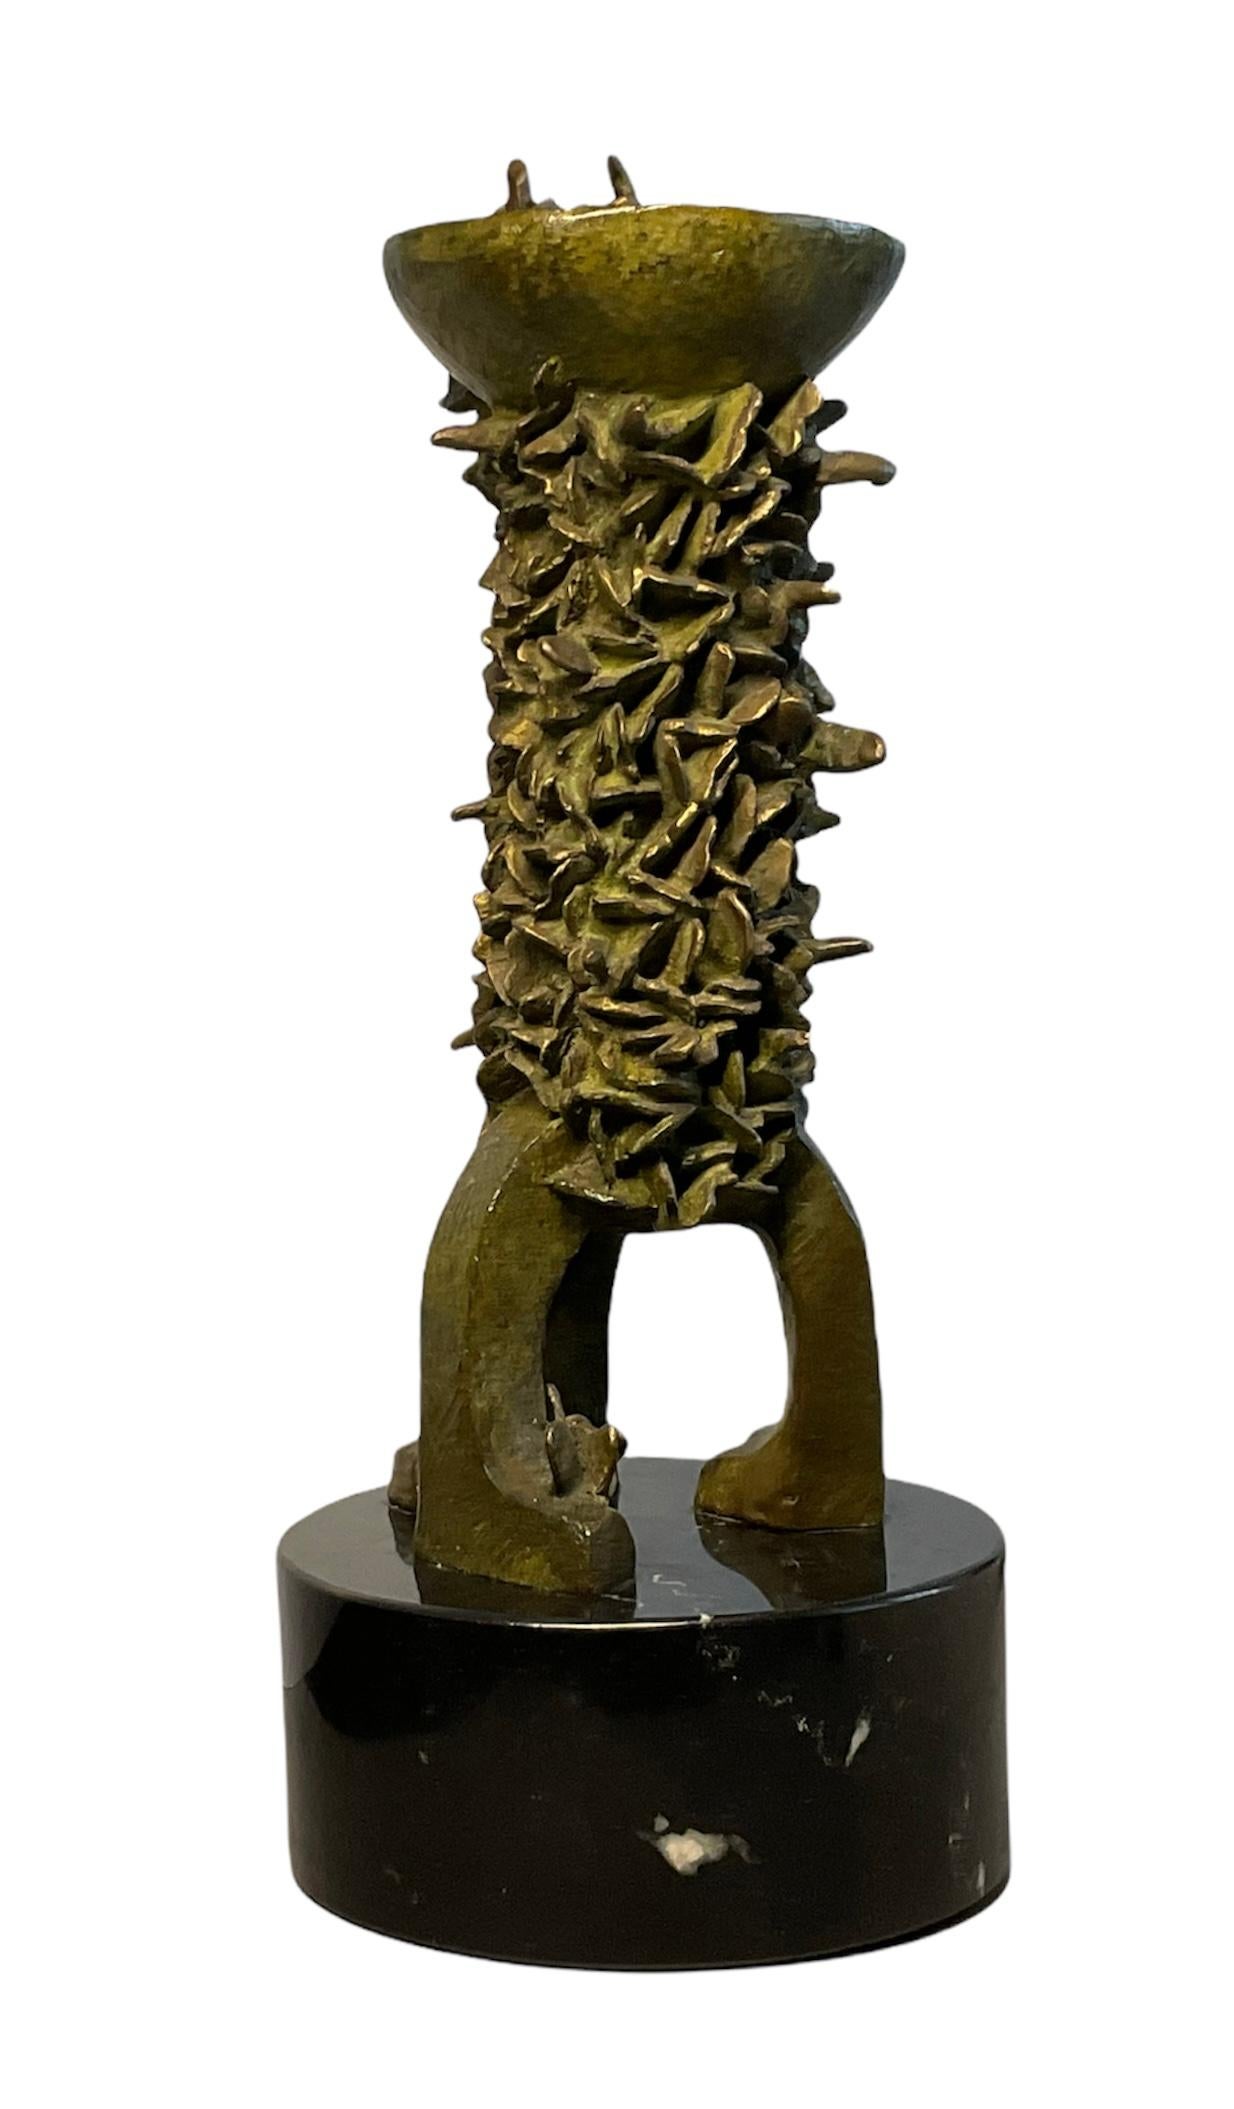 Metalwork Bronze Sculpture “Structure Of A Butterfly Nursery” by Melquíades R. Sastre